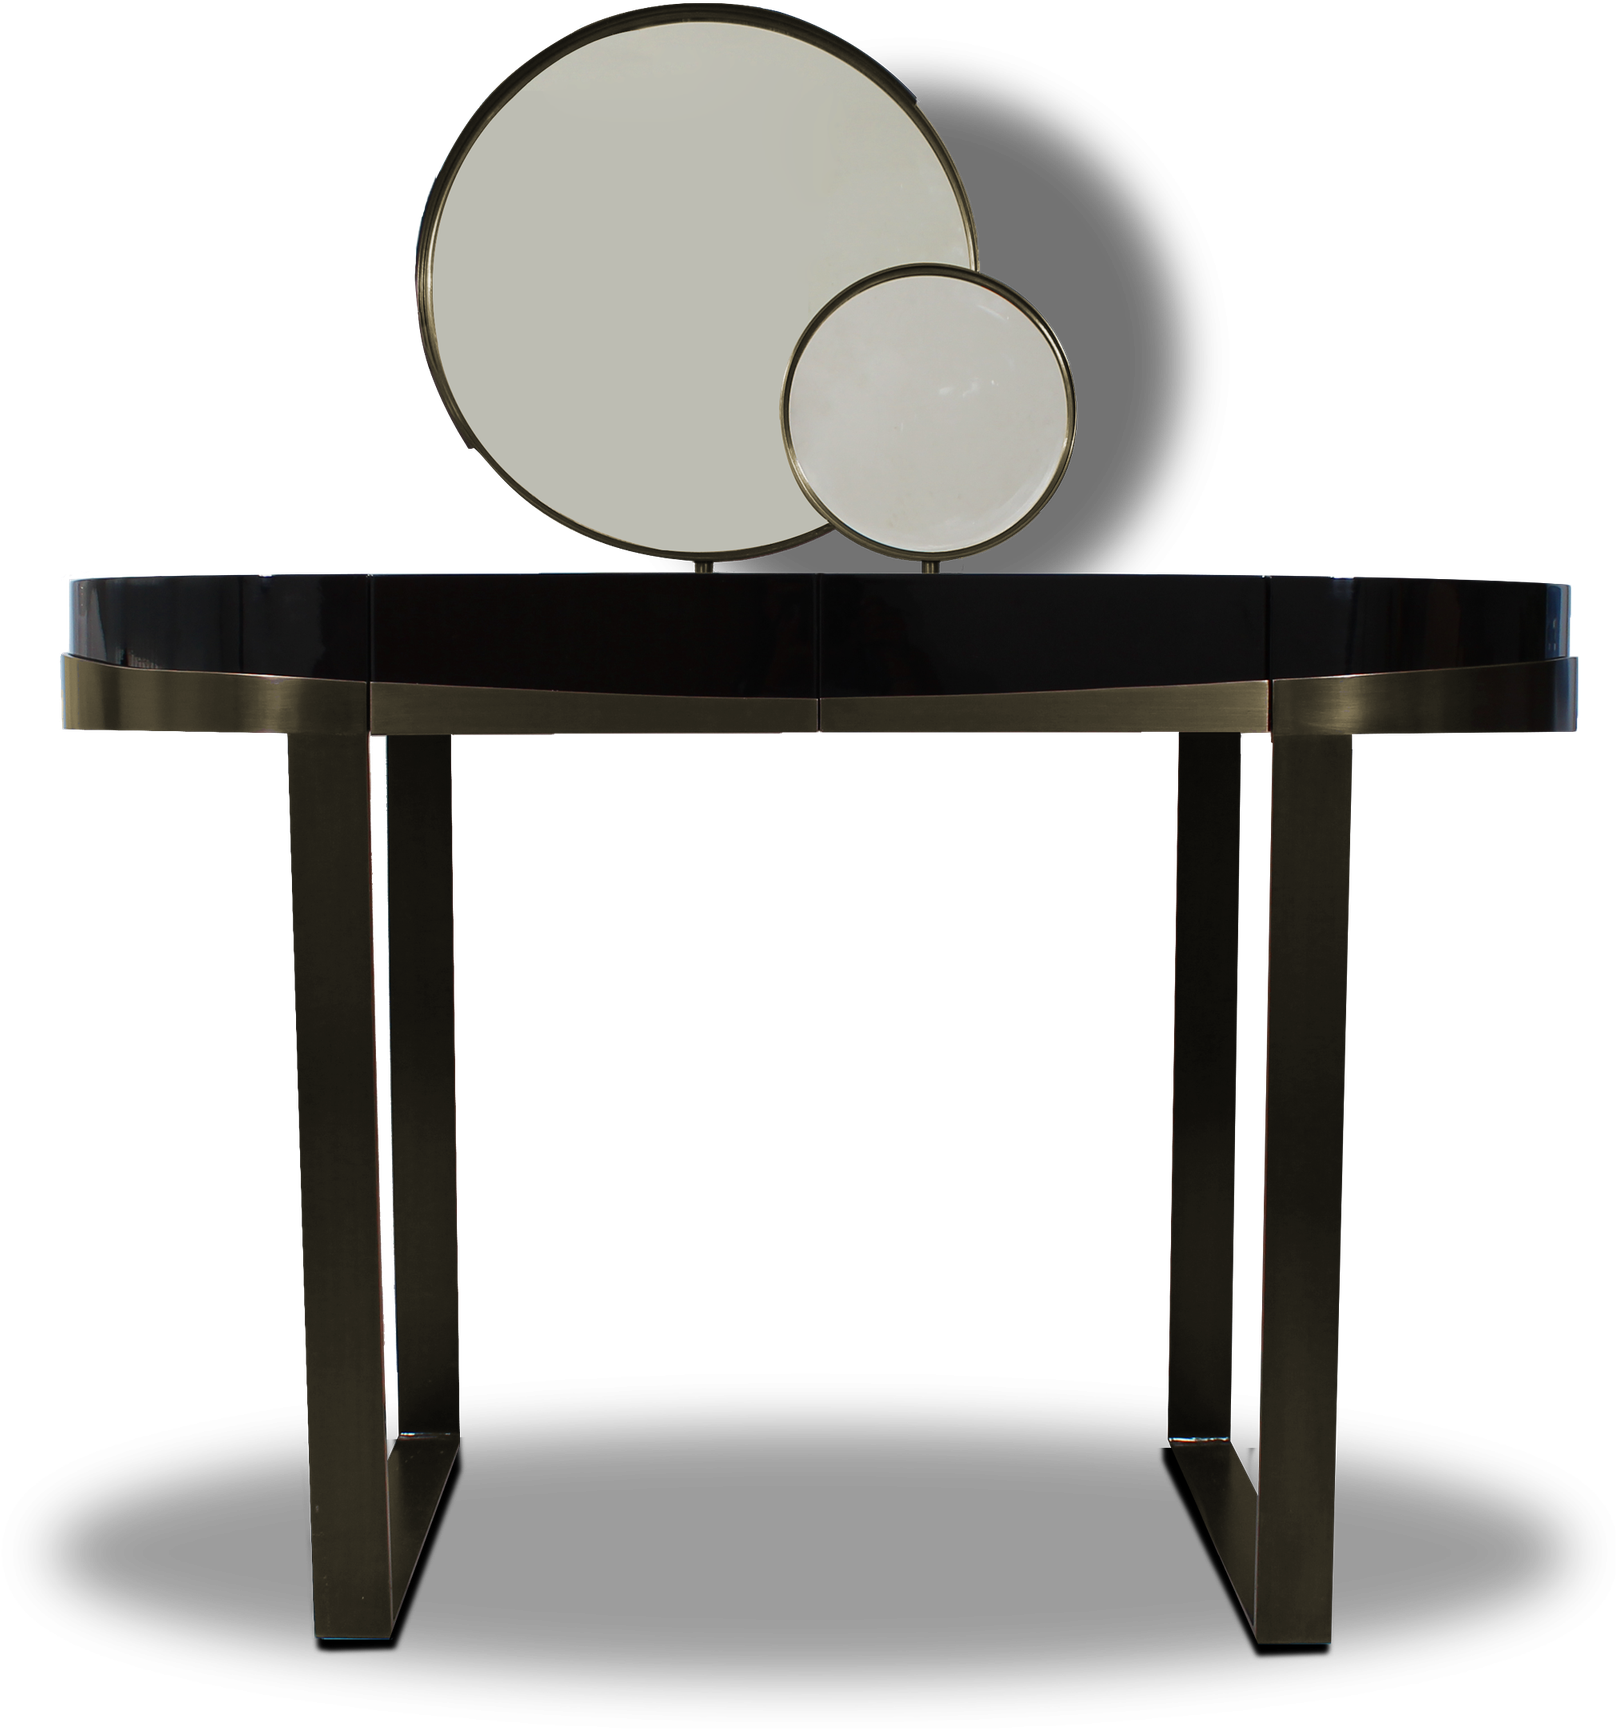 A Round Mirror On A Table